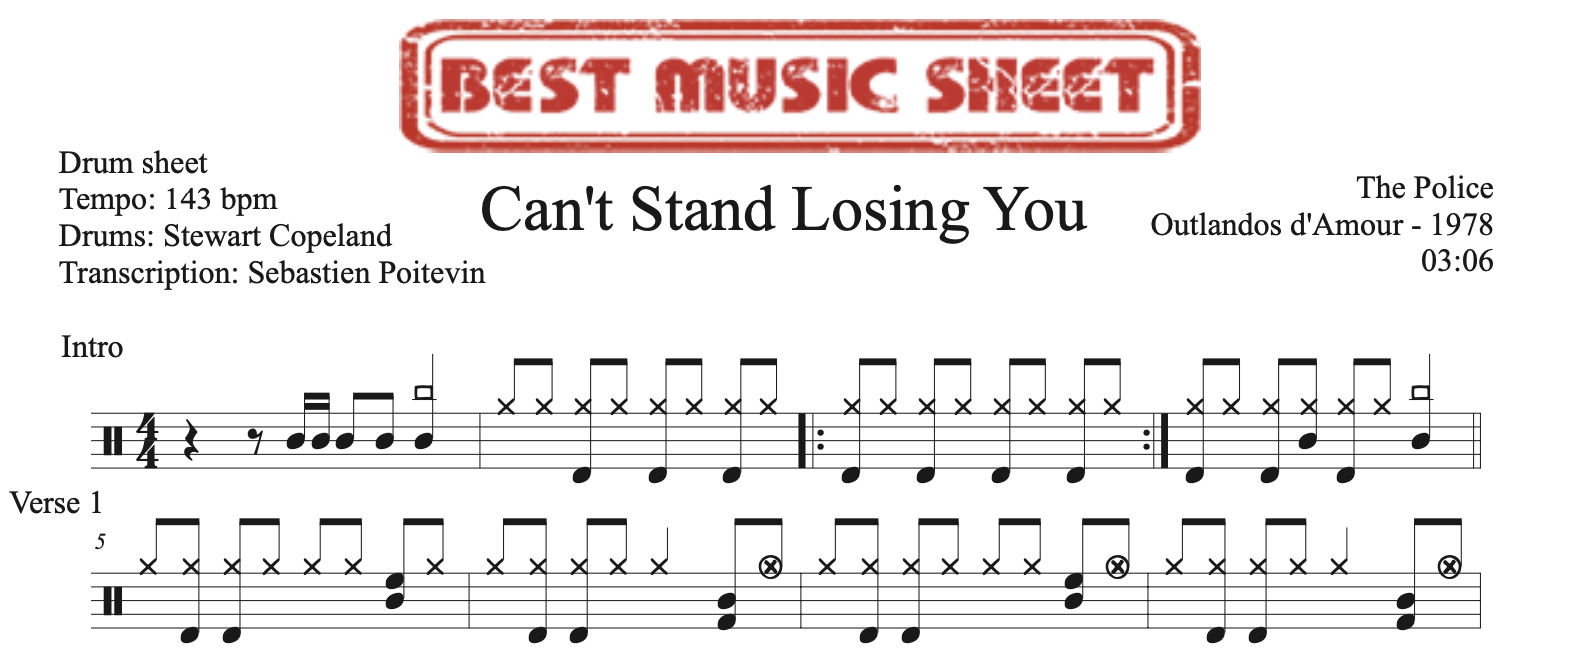 Sample drum sheet of Can't Stand Losing You by The Police